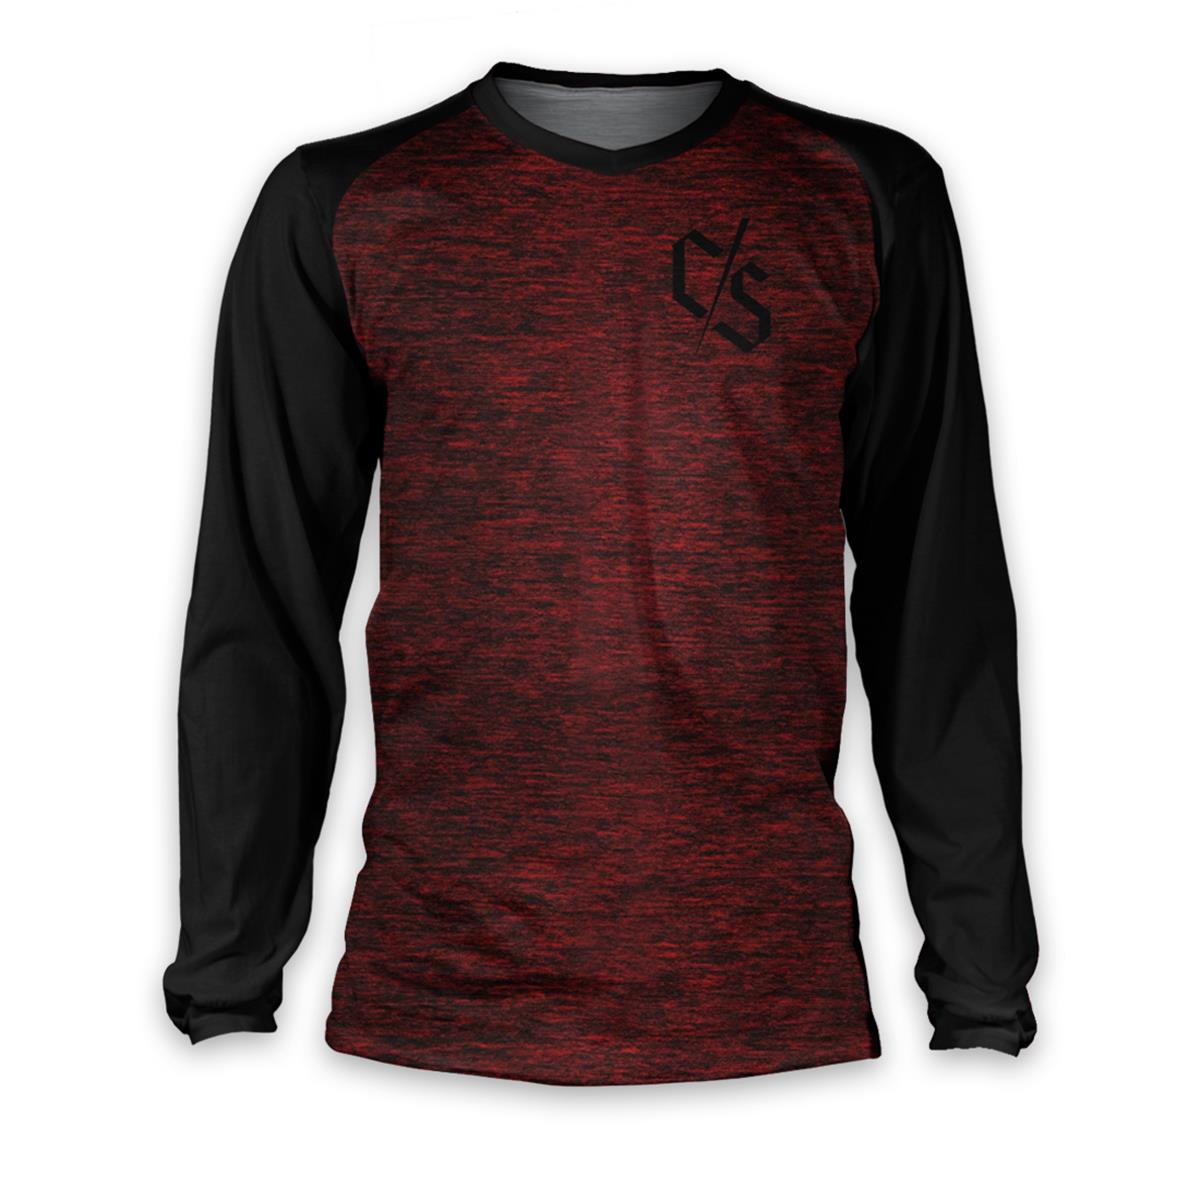 Loose Riders Downhill Jersey Long Sleeve C/S Heather Burgundy